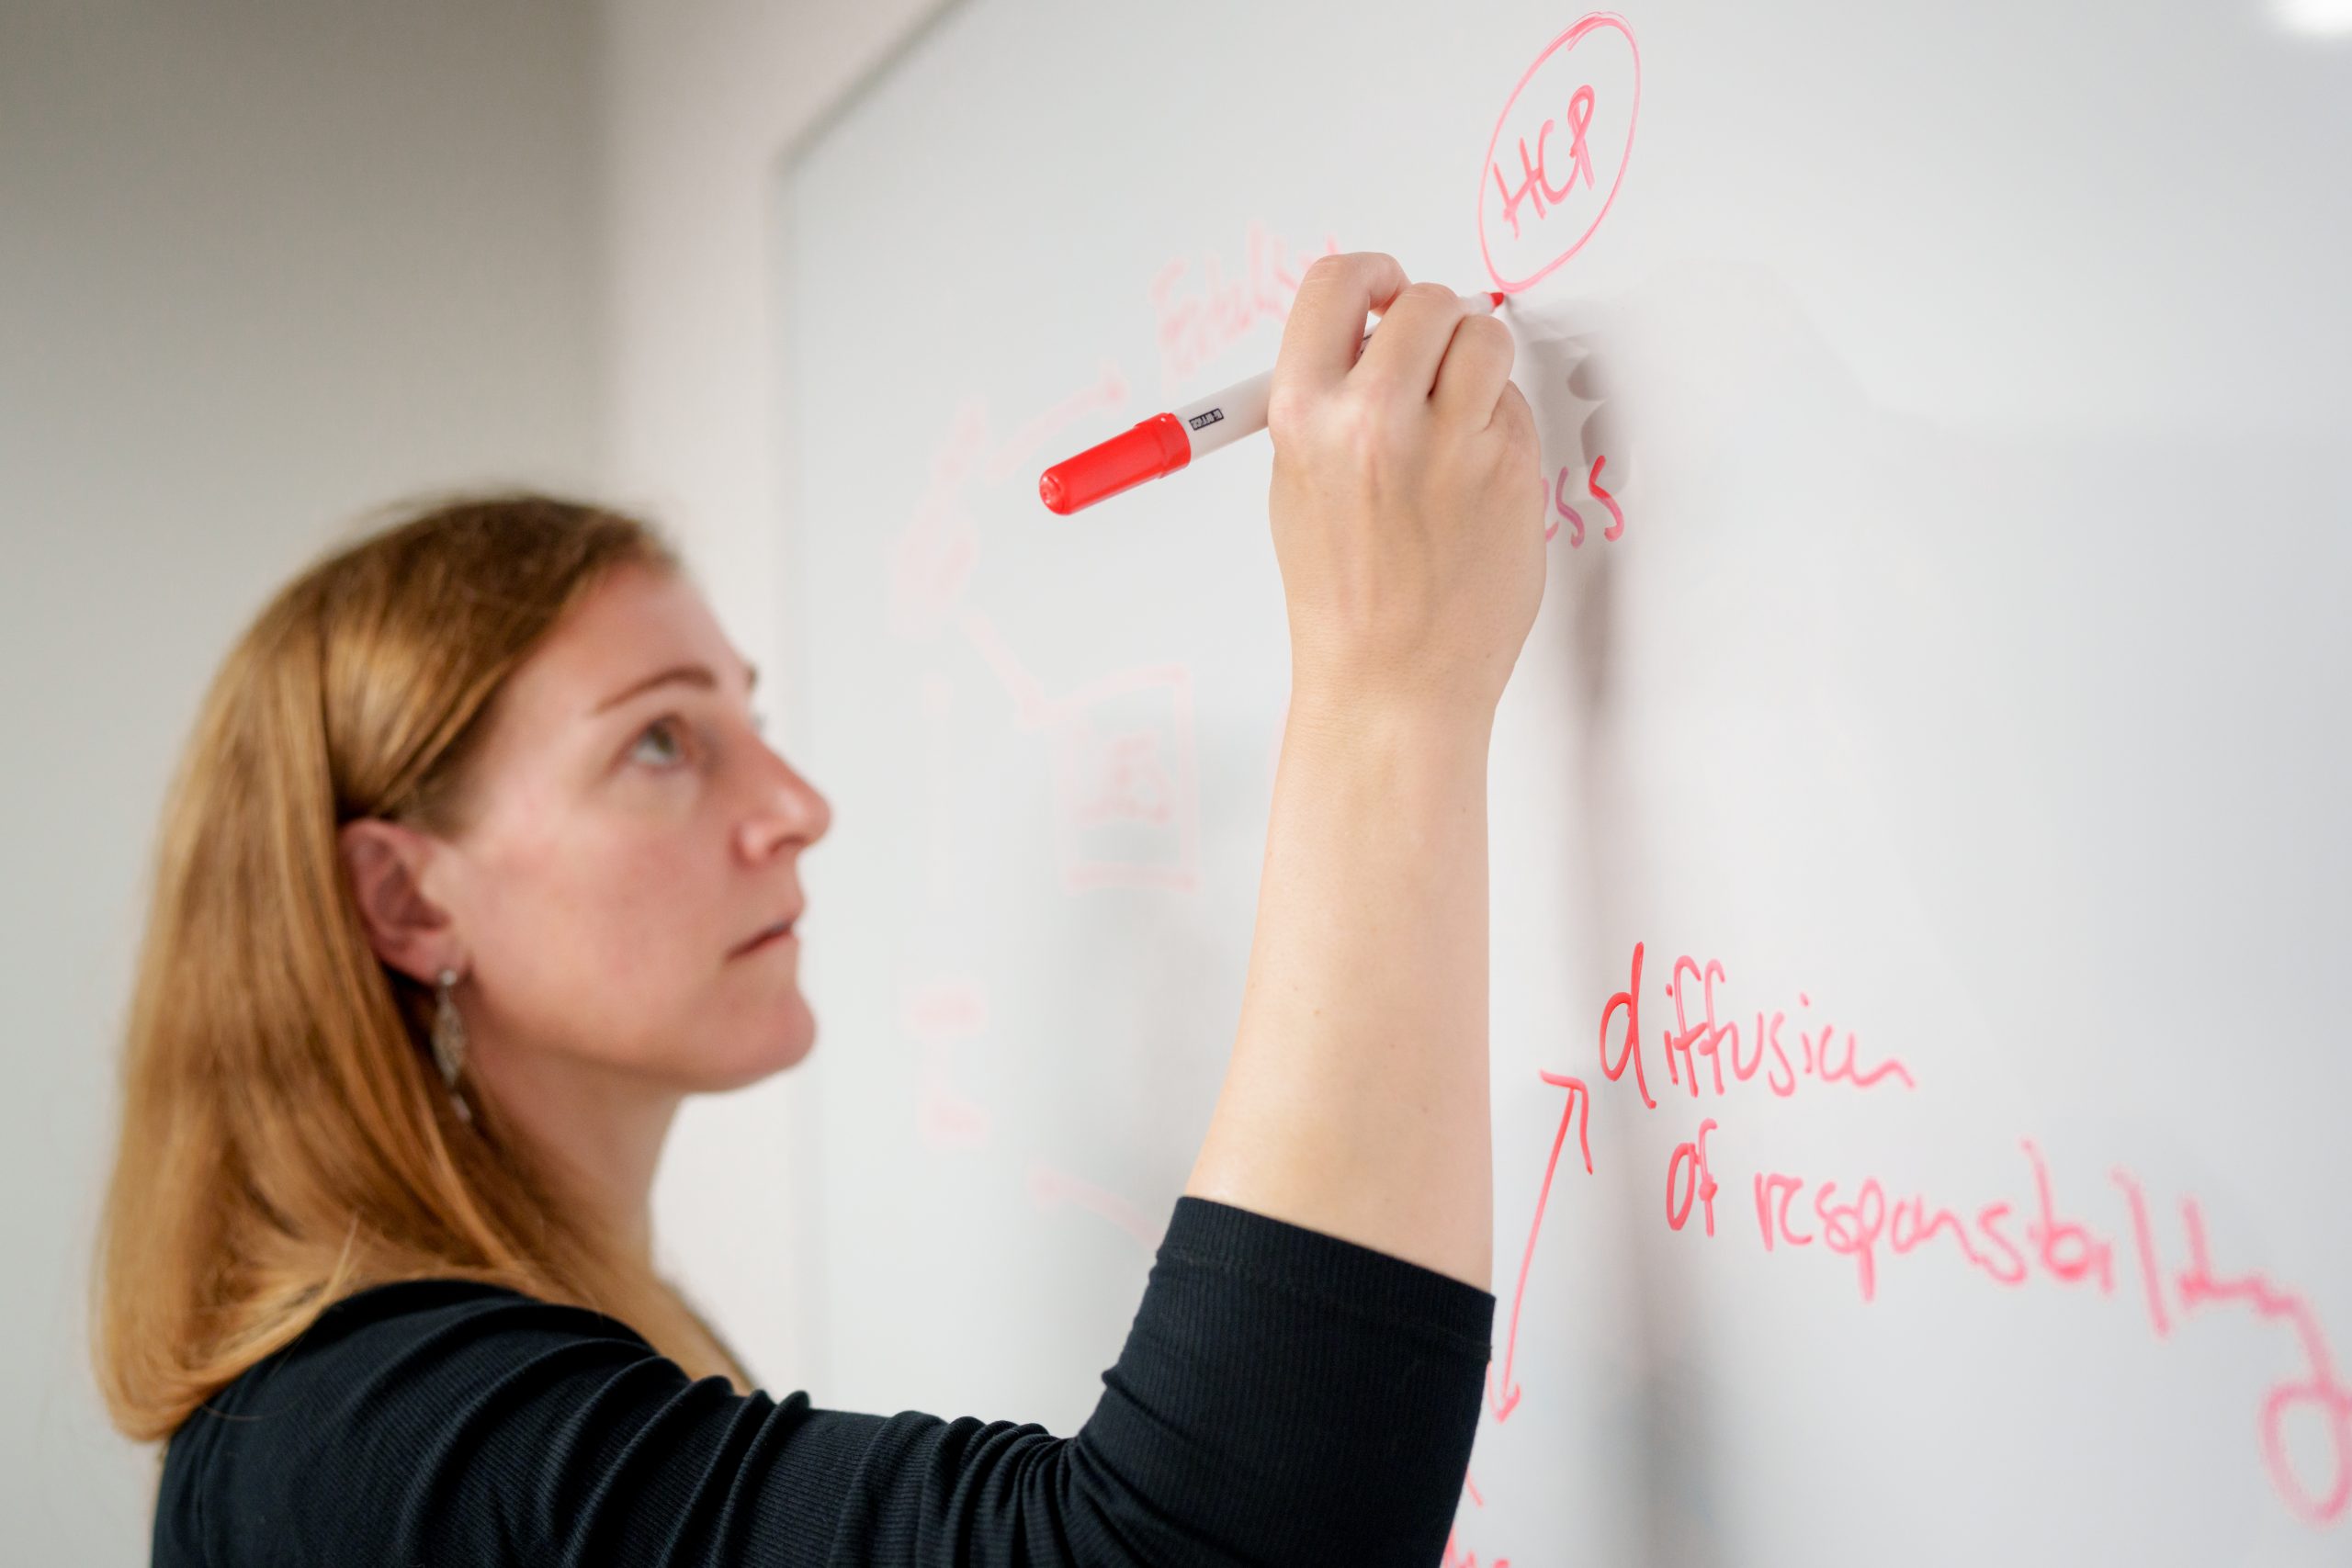 HRW researcher writing on a white board.